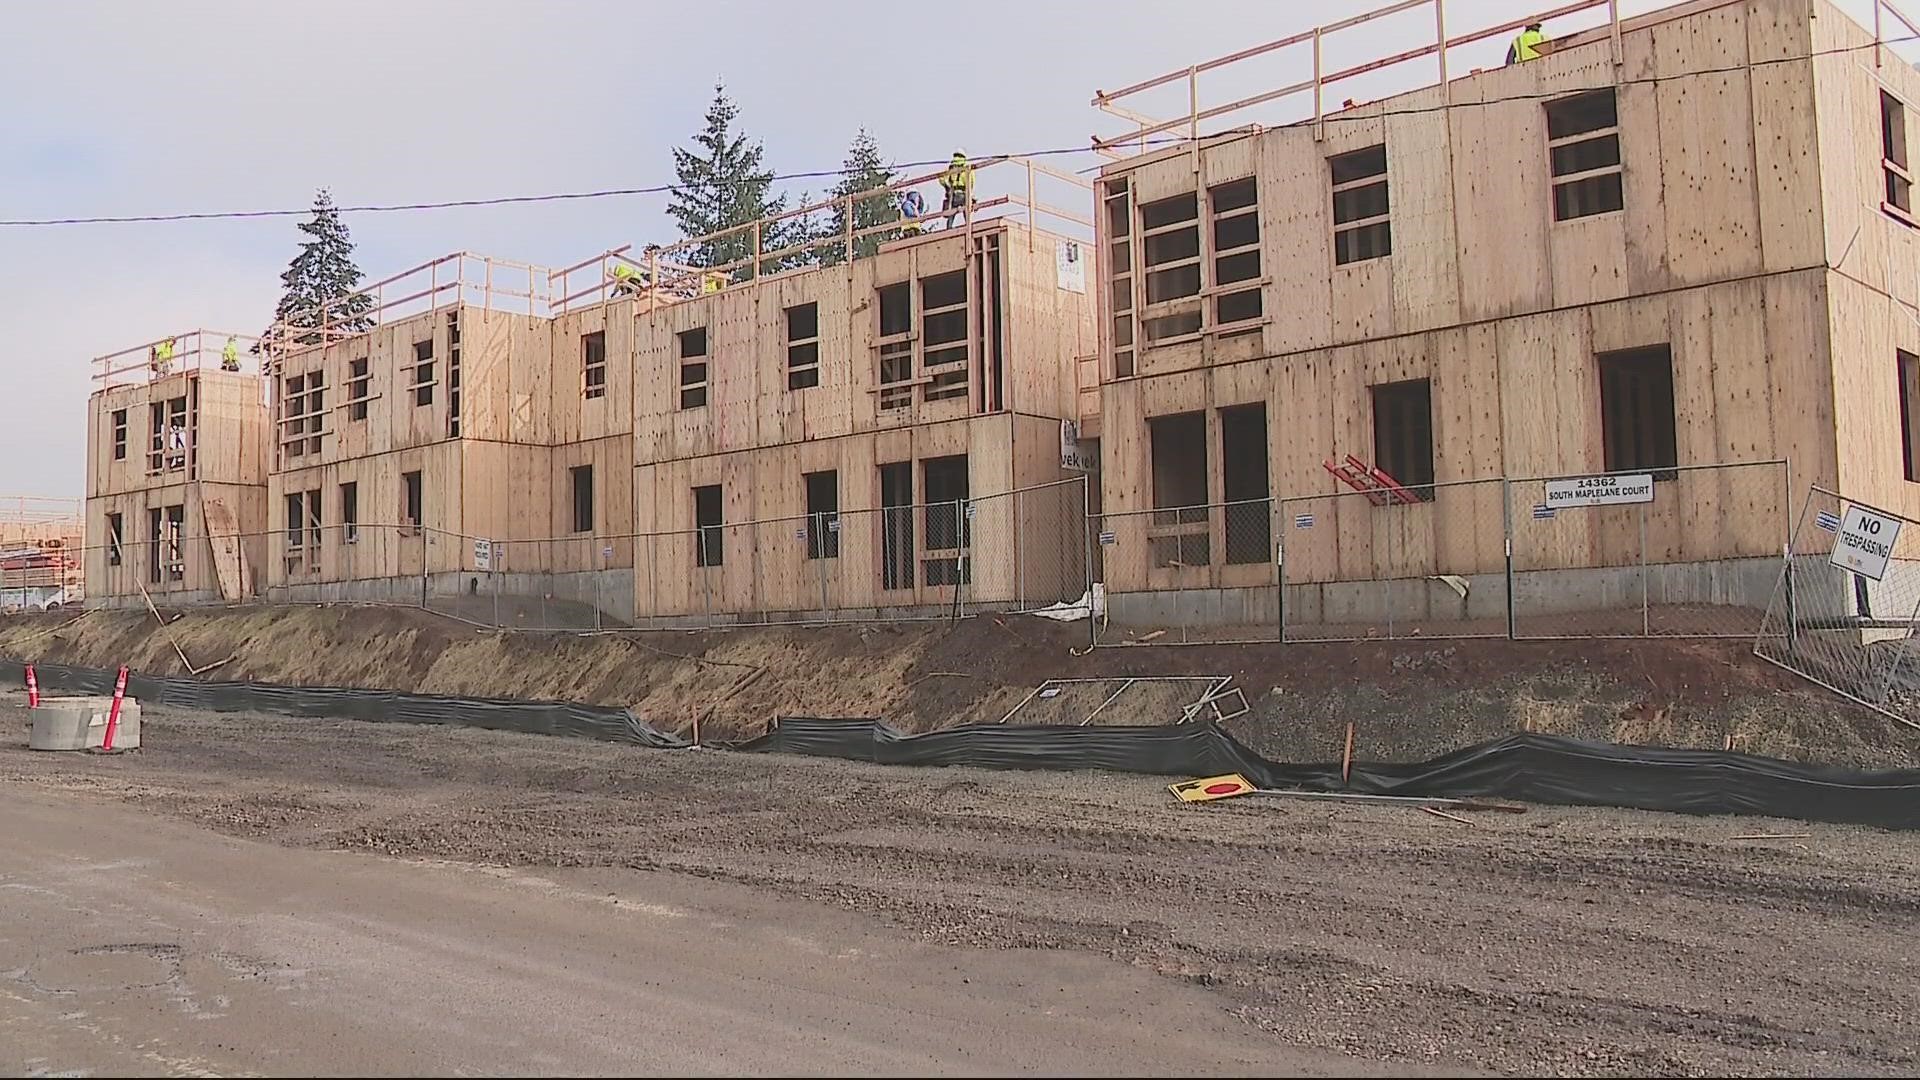 When the complex opens this summer, it will bring more living options to a part of the Portland metro suffering from its own housing crisis.